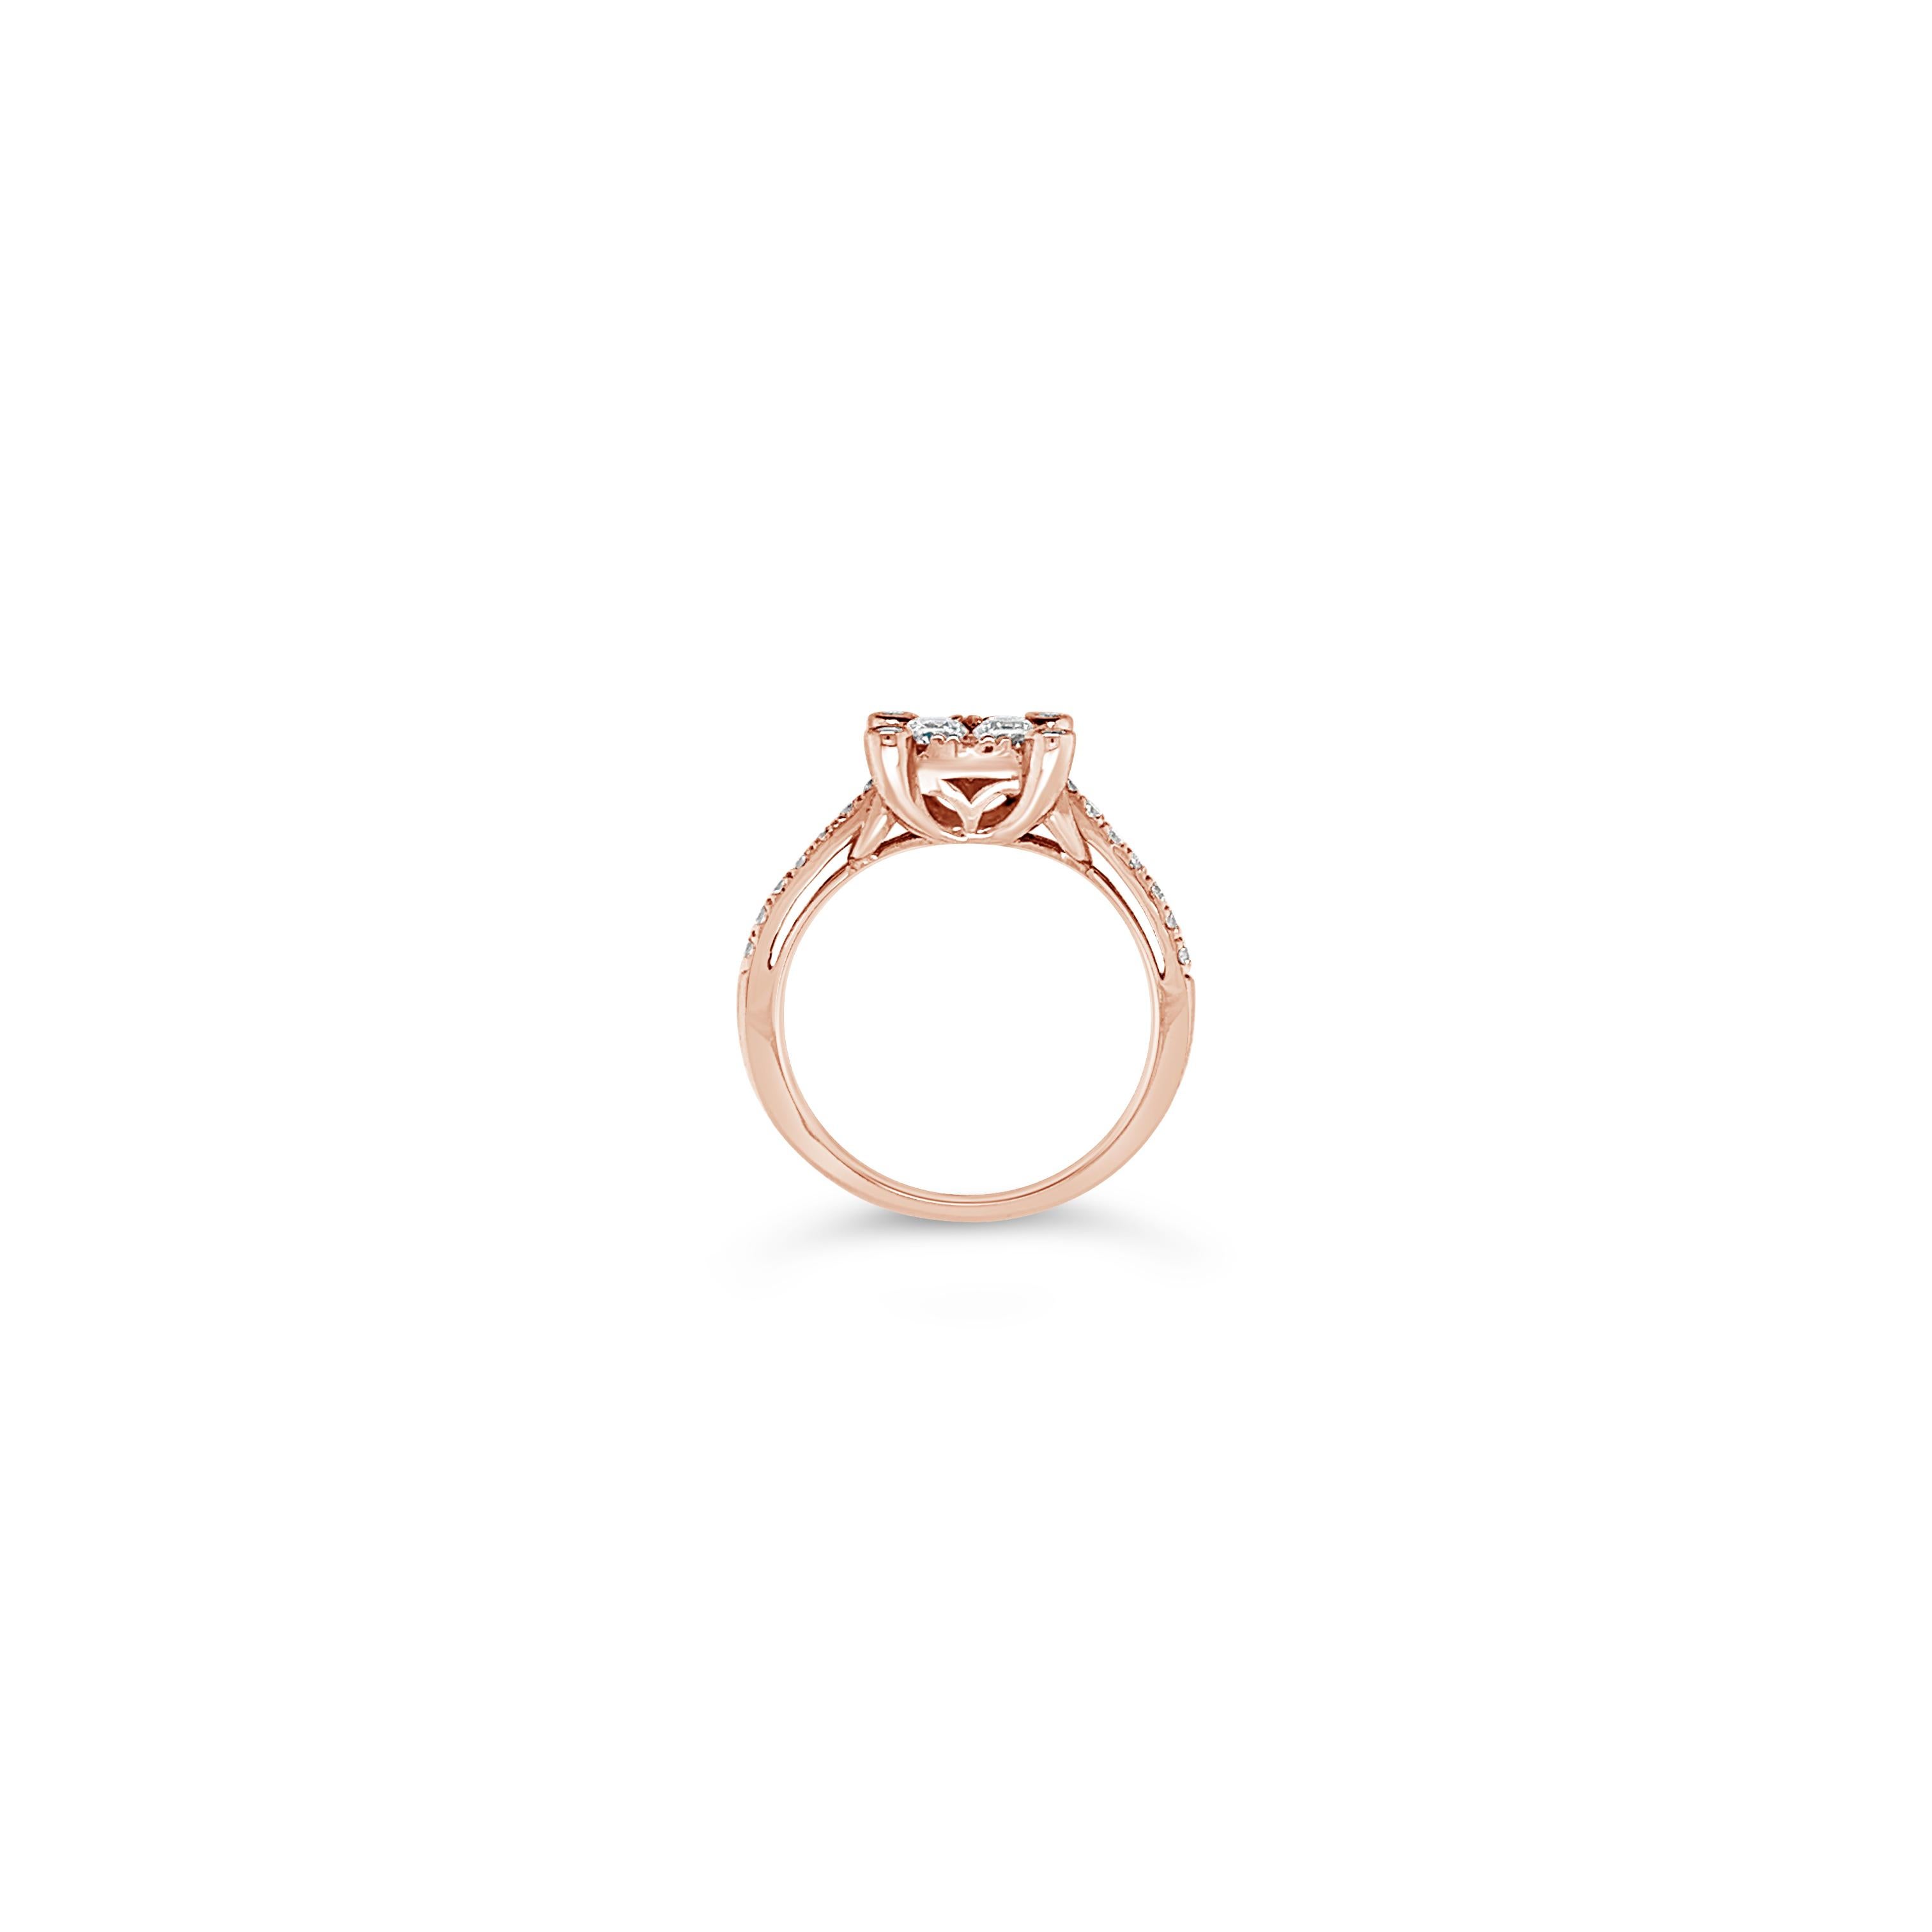 Le Vian® Ring featuring .90 cts. Vanilla Diamonds® set in 14K Strawberry Gold®

Diamonds Breakdown:
.90 cts White Diamonds

Gems Breakdown:
None

Ring may or may not be sizable, please feel free to reach out with any questions!

Item comes with a Le